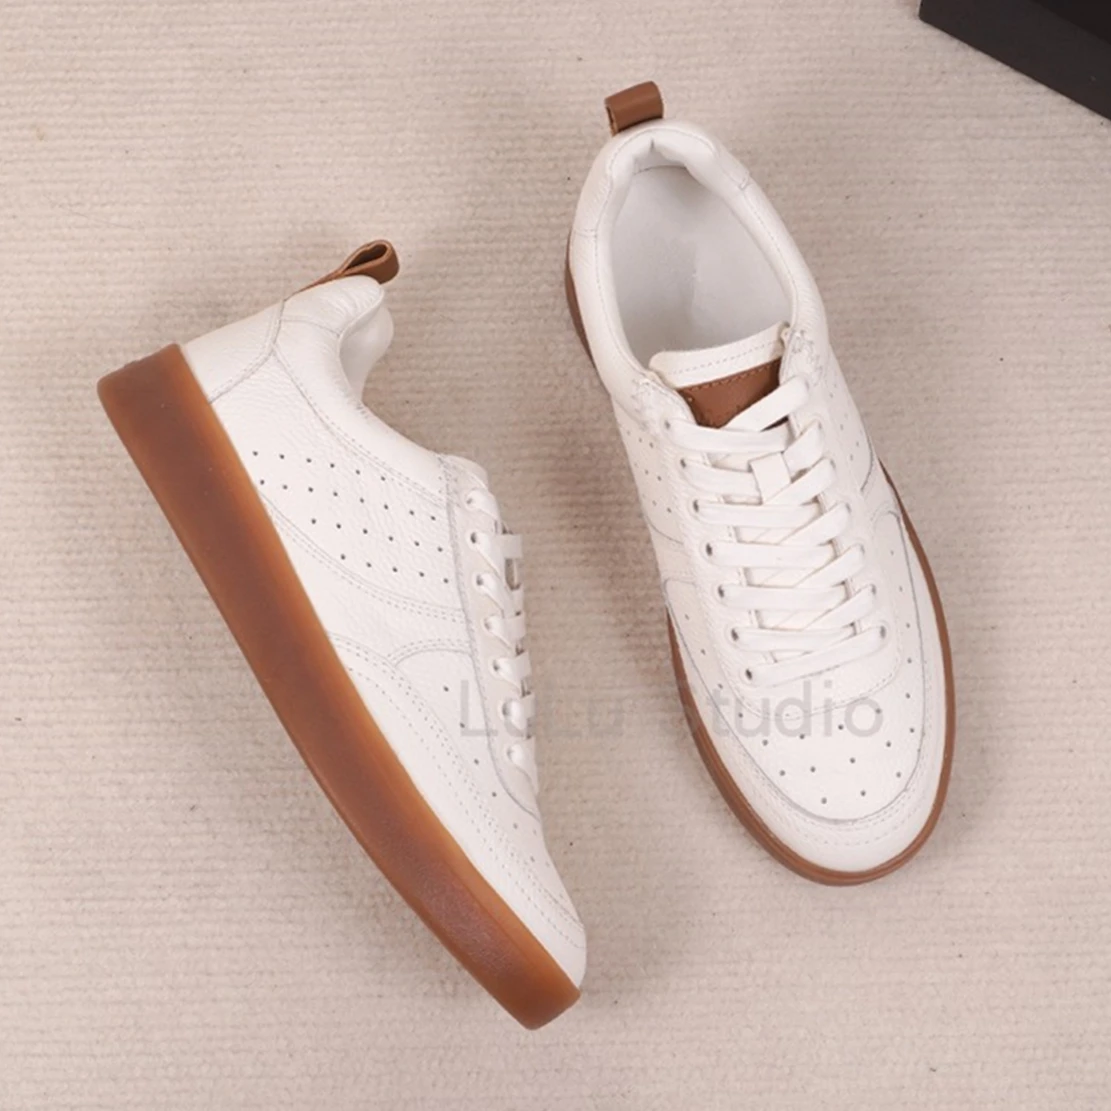 

Jenny&Dave New Genuine Leather Women's Color-Blocking Casual Shoes Fashion Leather Sneakers Shoes Women